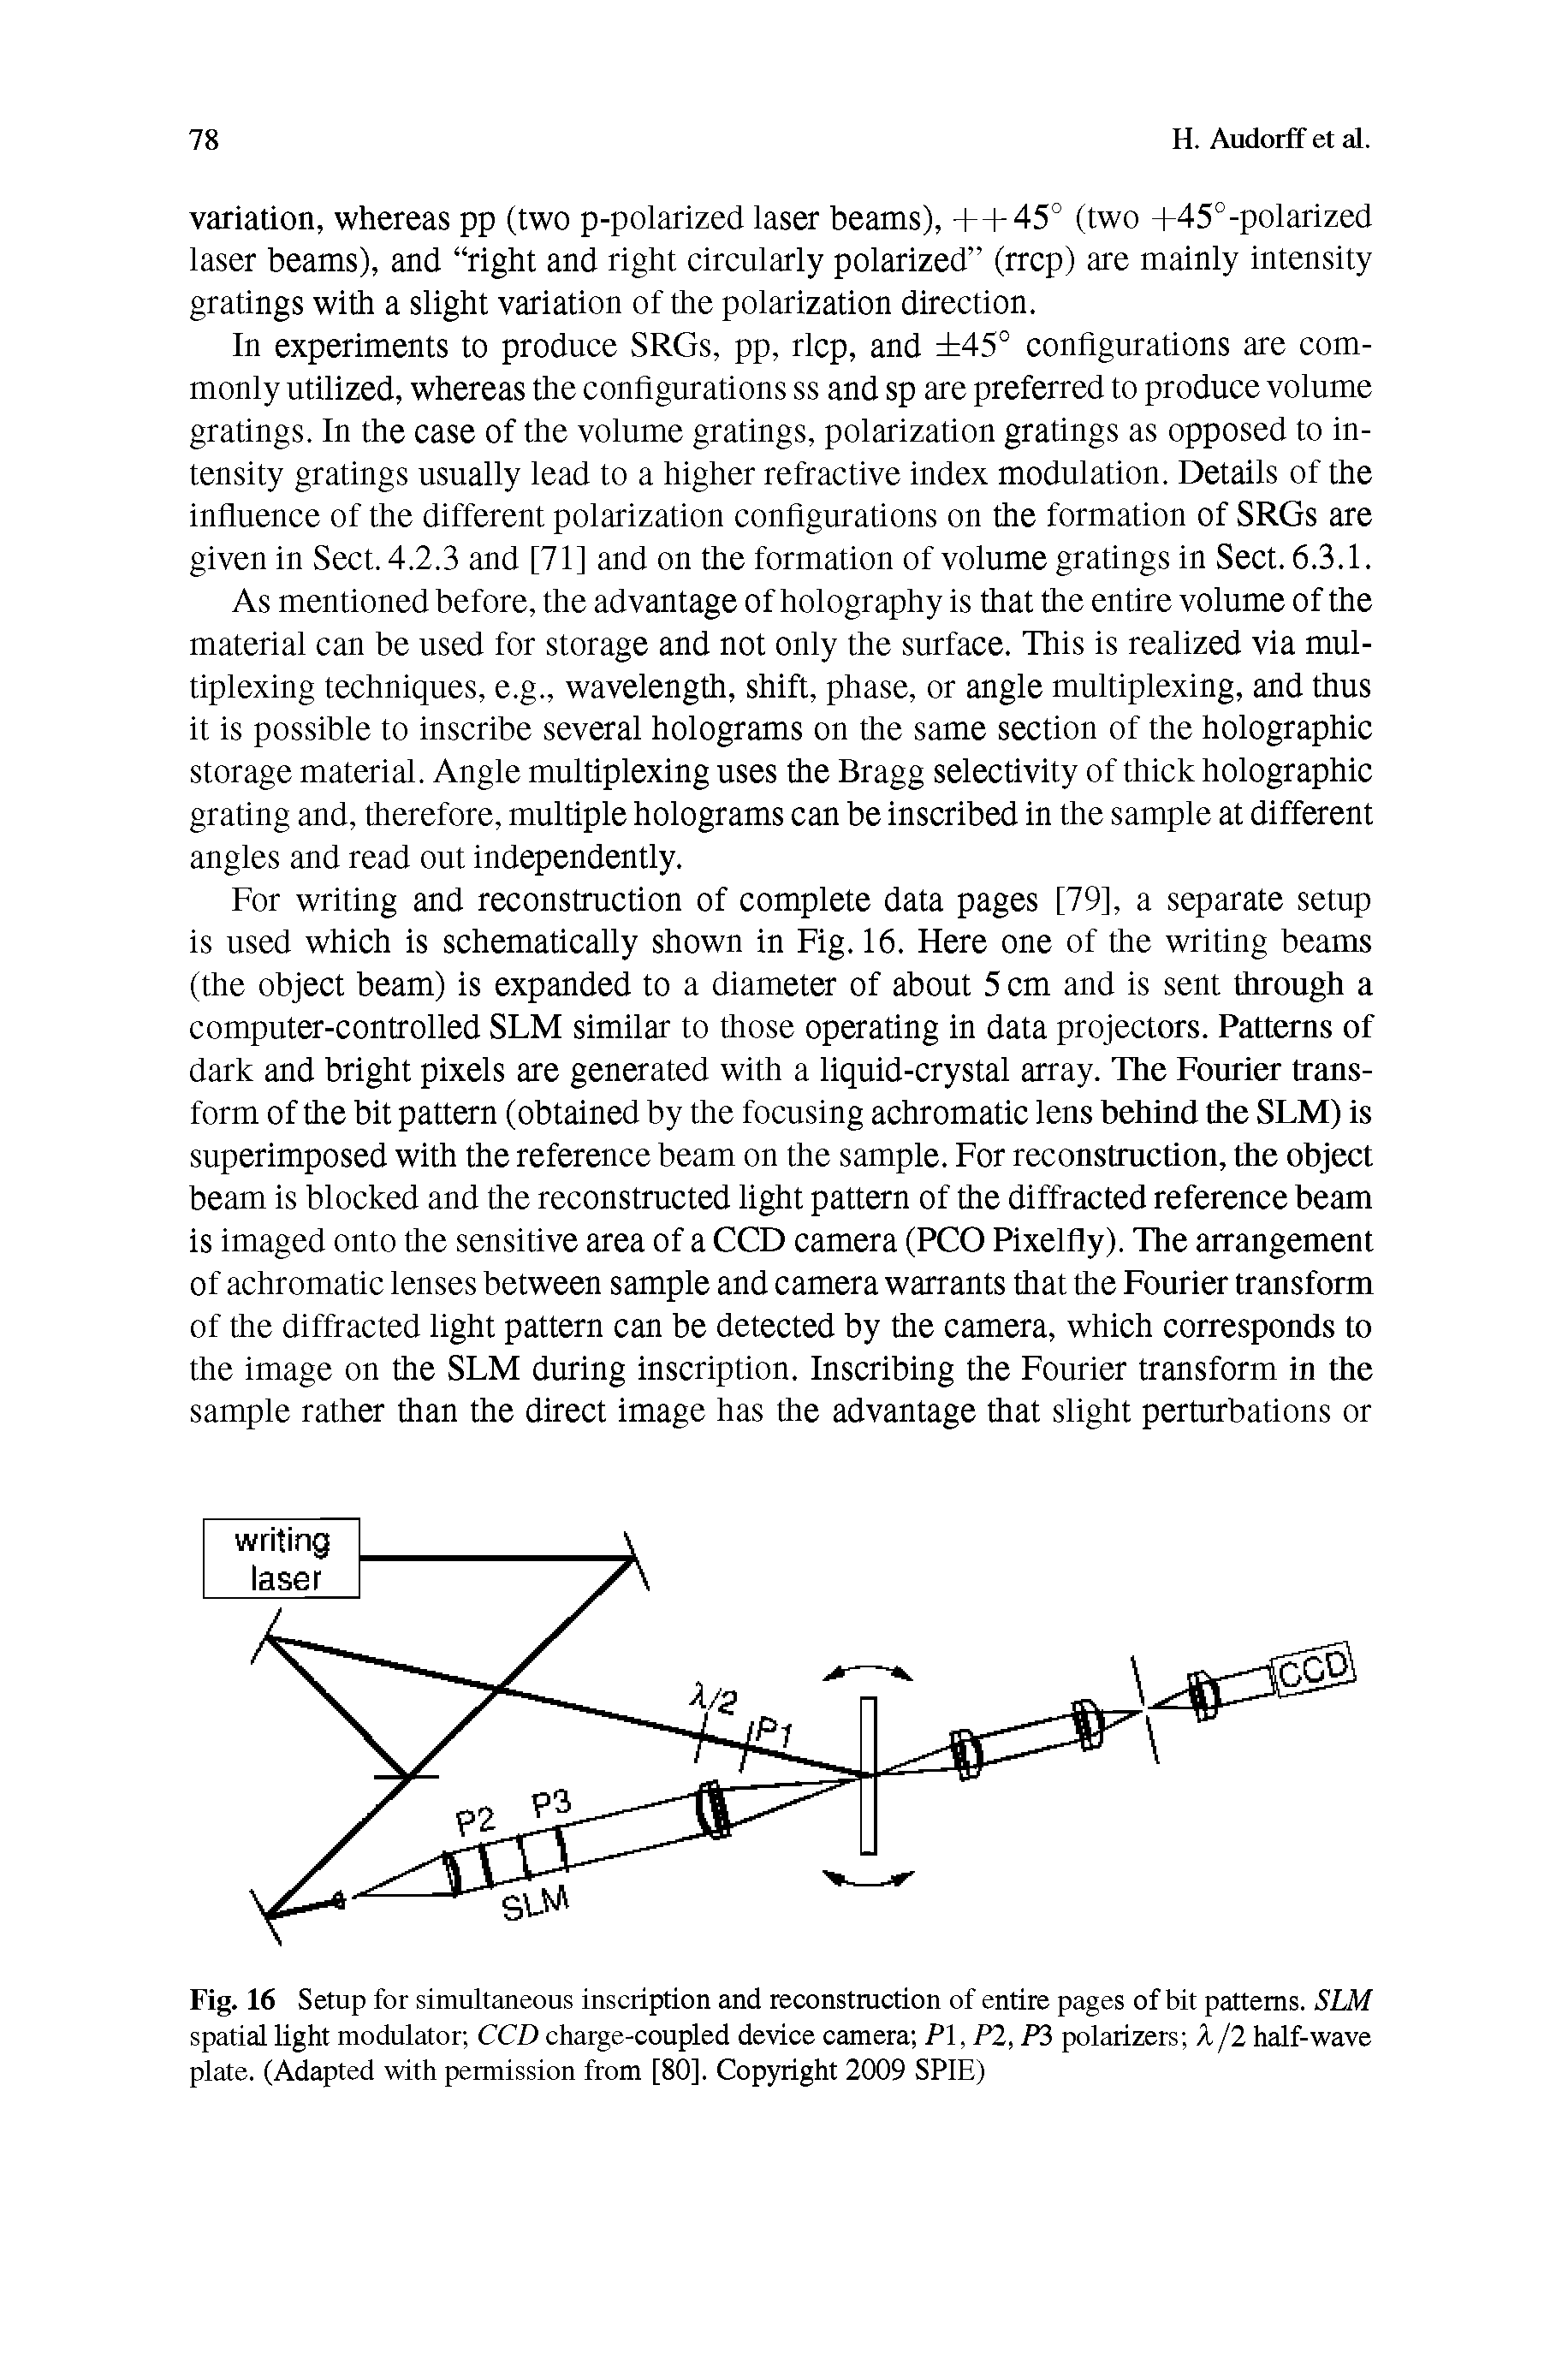 Fig. 16 Setup for simultaneous inscription and reconstruction of entire pages of bit patterns. SLM spatial light modulator CCD charge-coupled device camera PI, PI, Pi polarizers X/2 half-wave plate. (Adapted with permission from [80]. Copyright 2009 SPIE)...